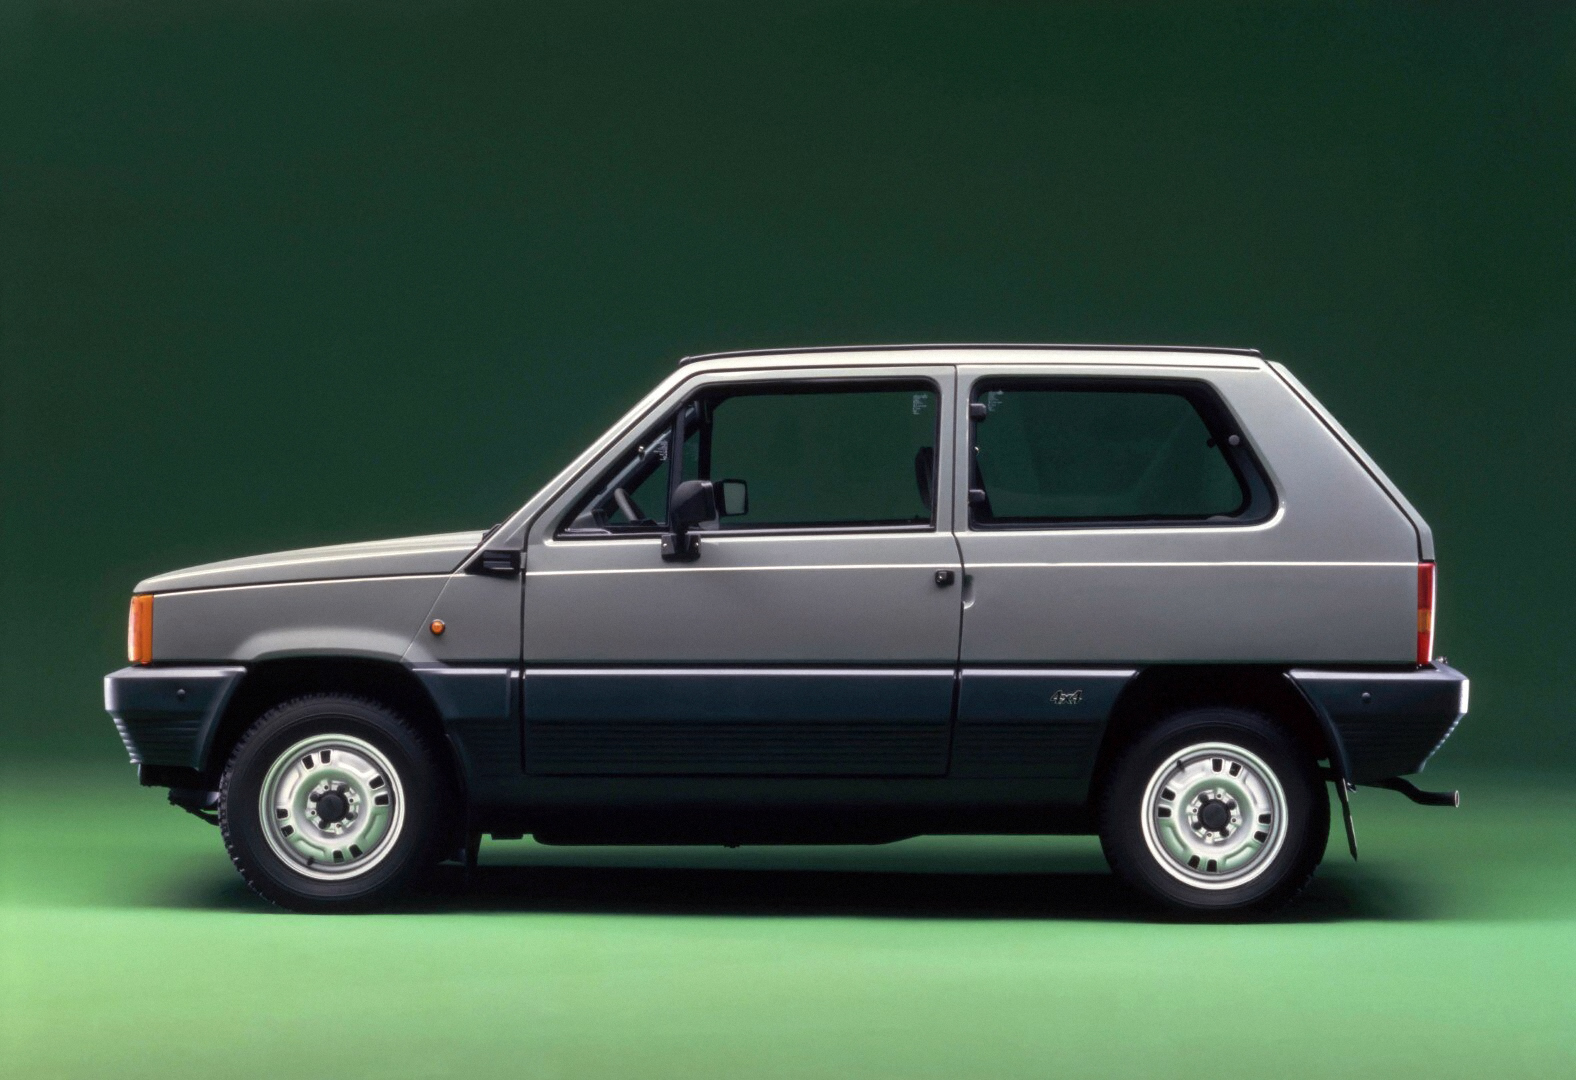 https://s1.cdn.autoevolution.com/images/news/past-and-present-the-40-year-anniversary-of-the-fiat-panda-149341_1.jpeg